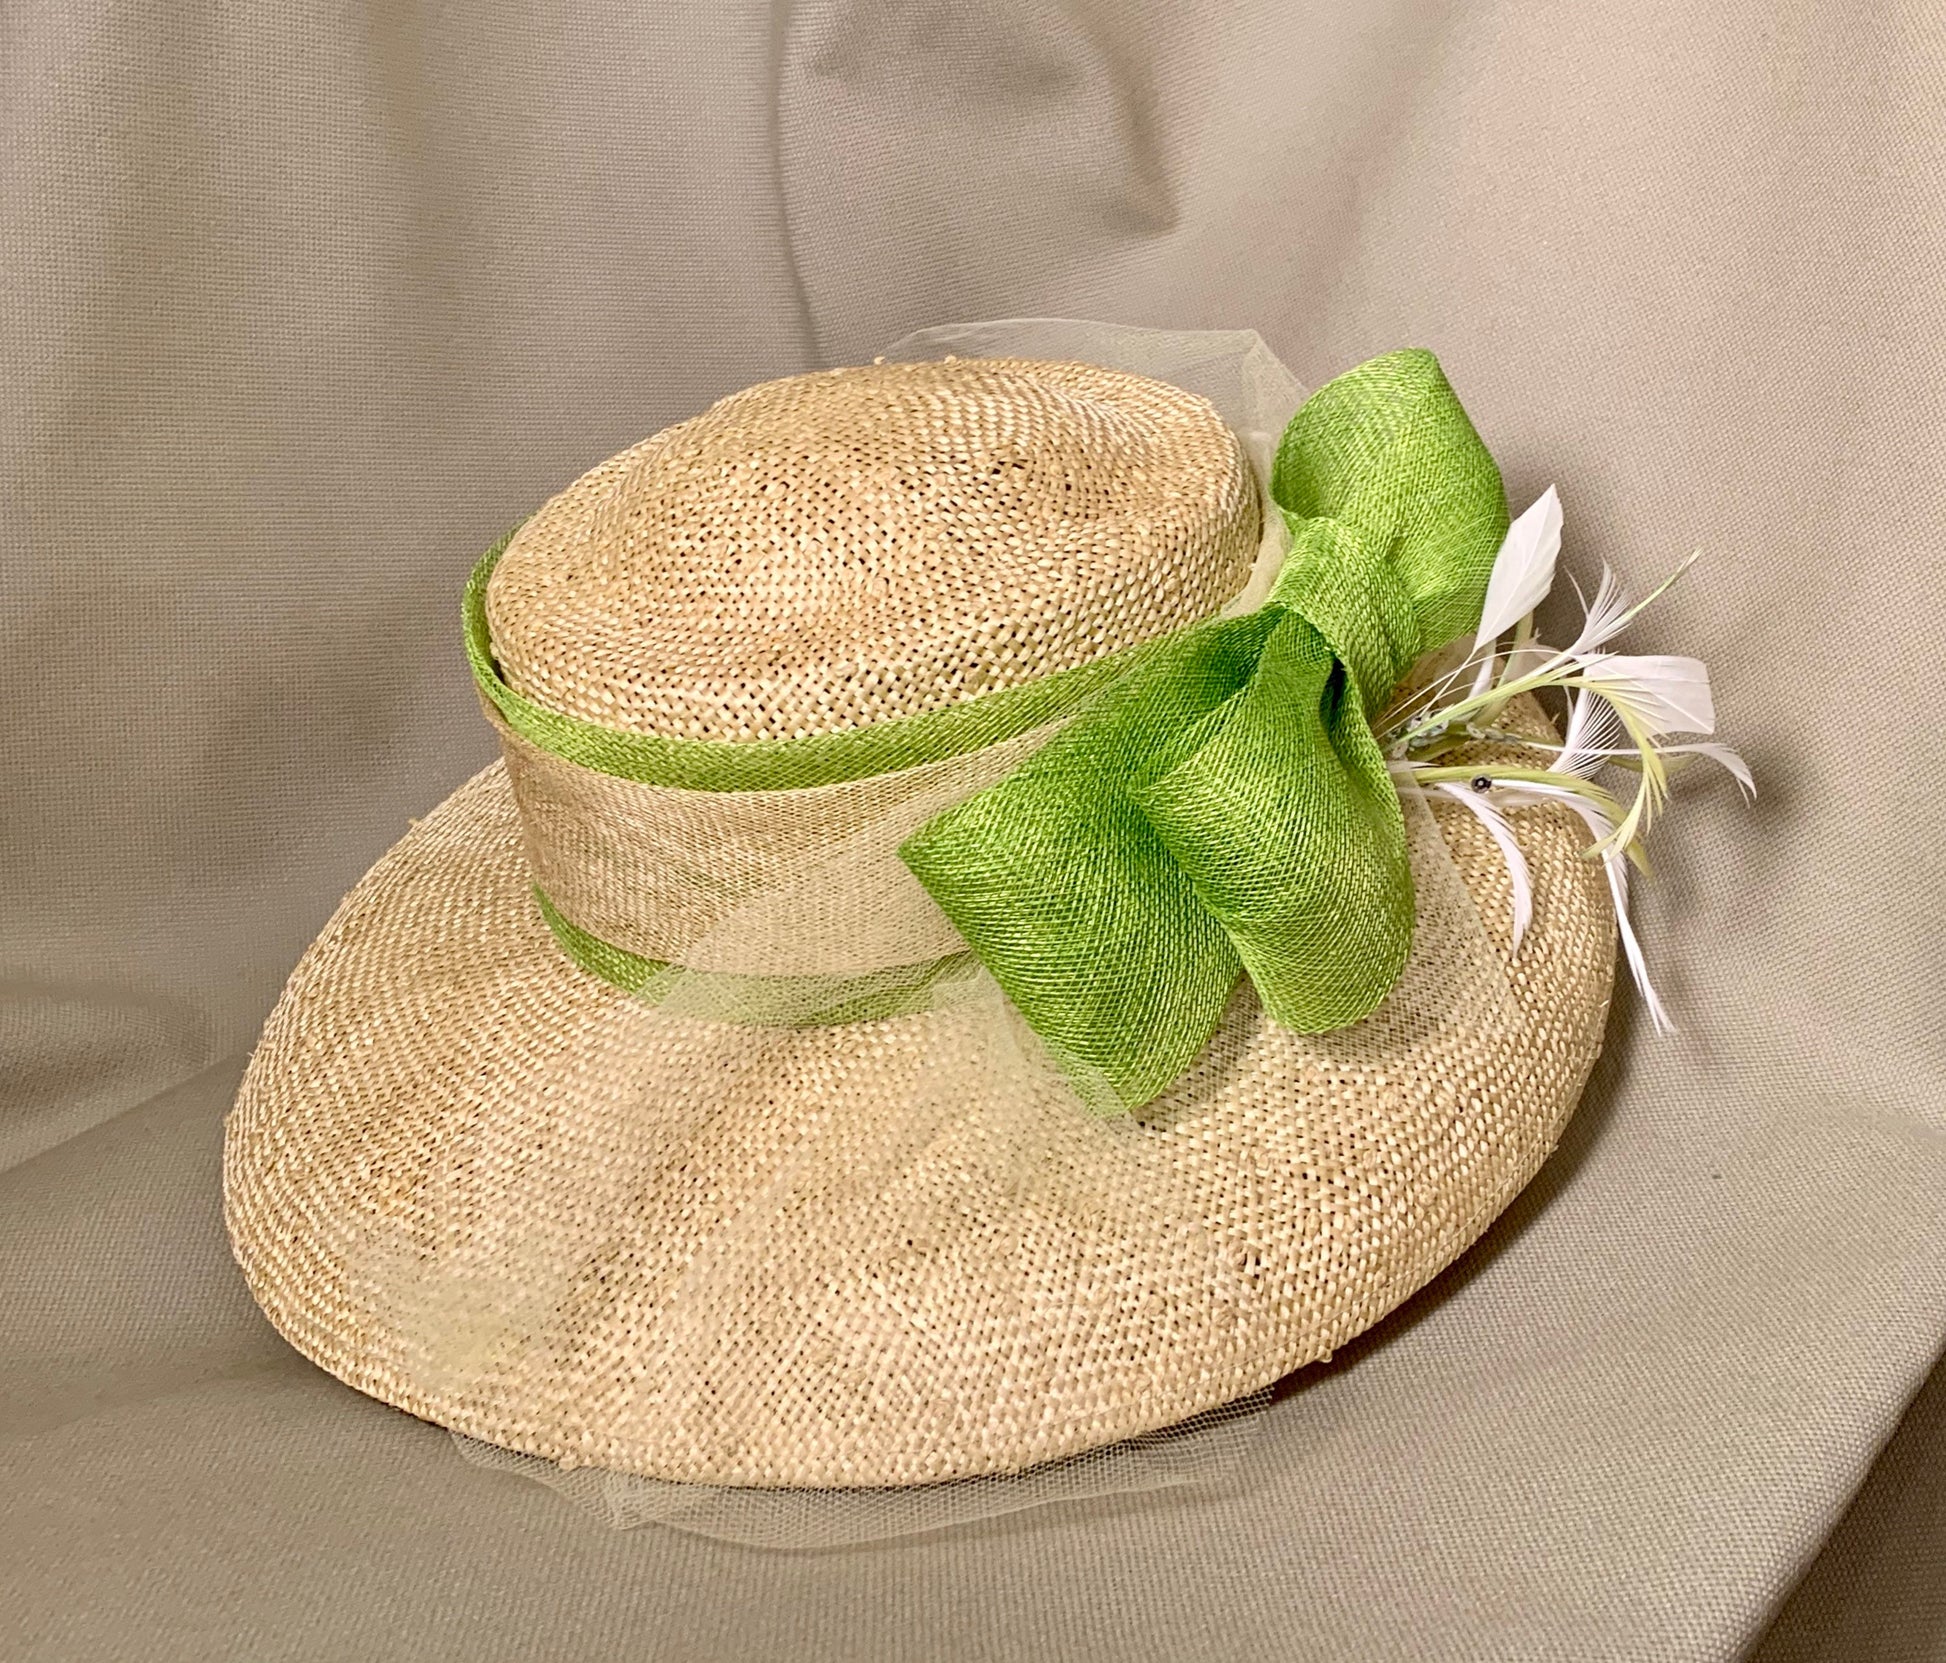 Natural knitted straw with Green Bow and white feathers-Church hat-Ken –  Geaux Chapeaux Millinery